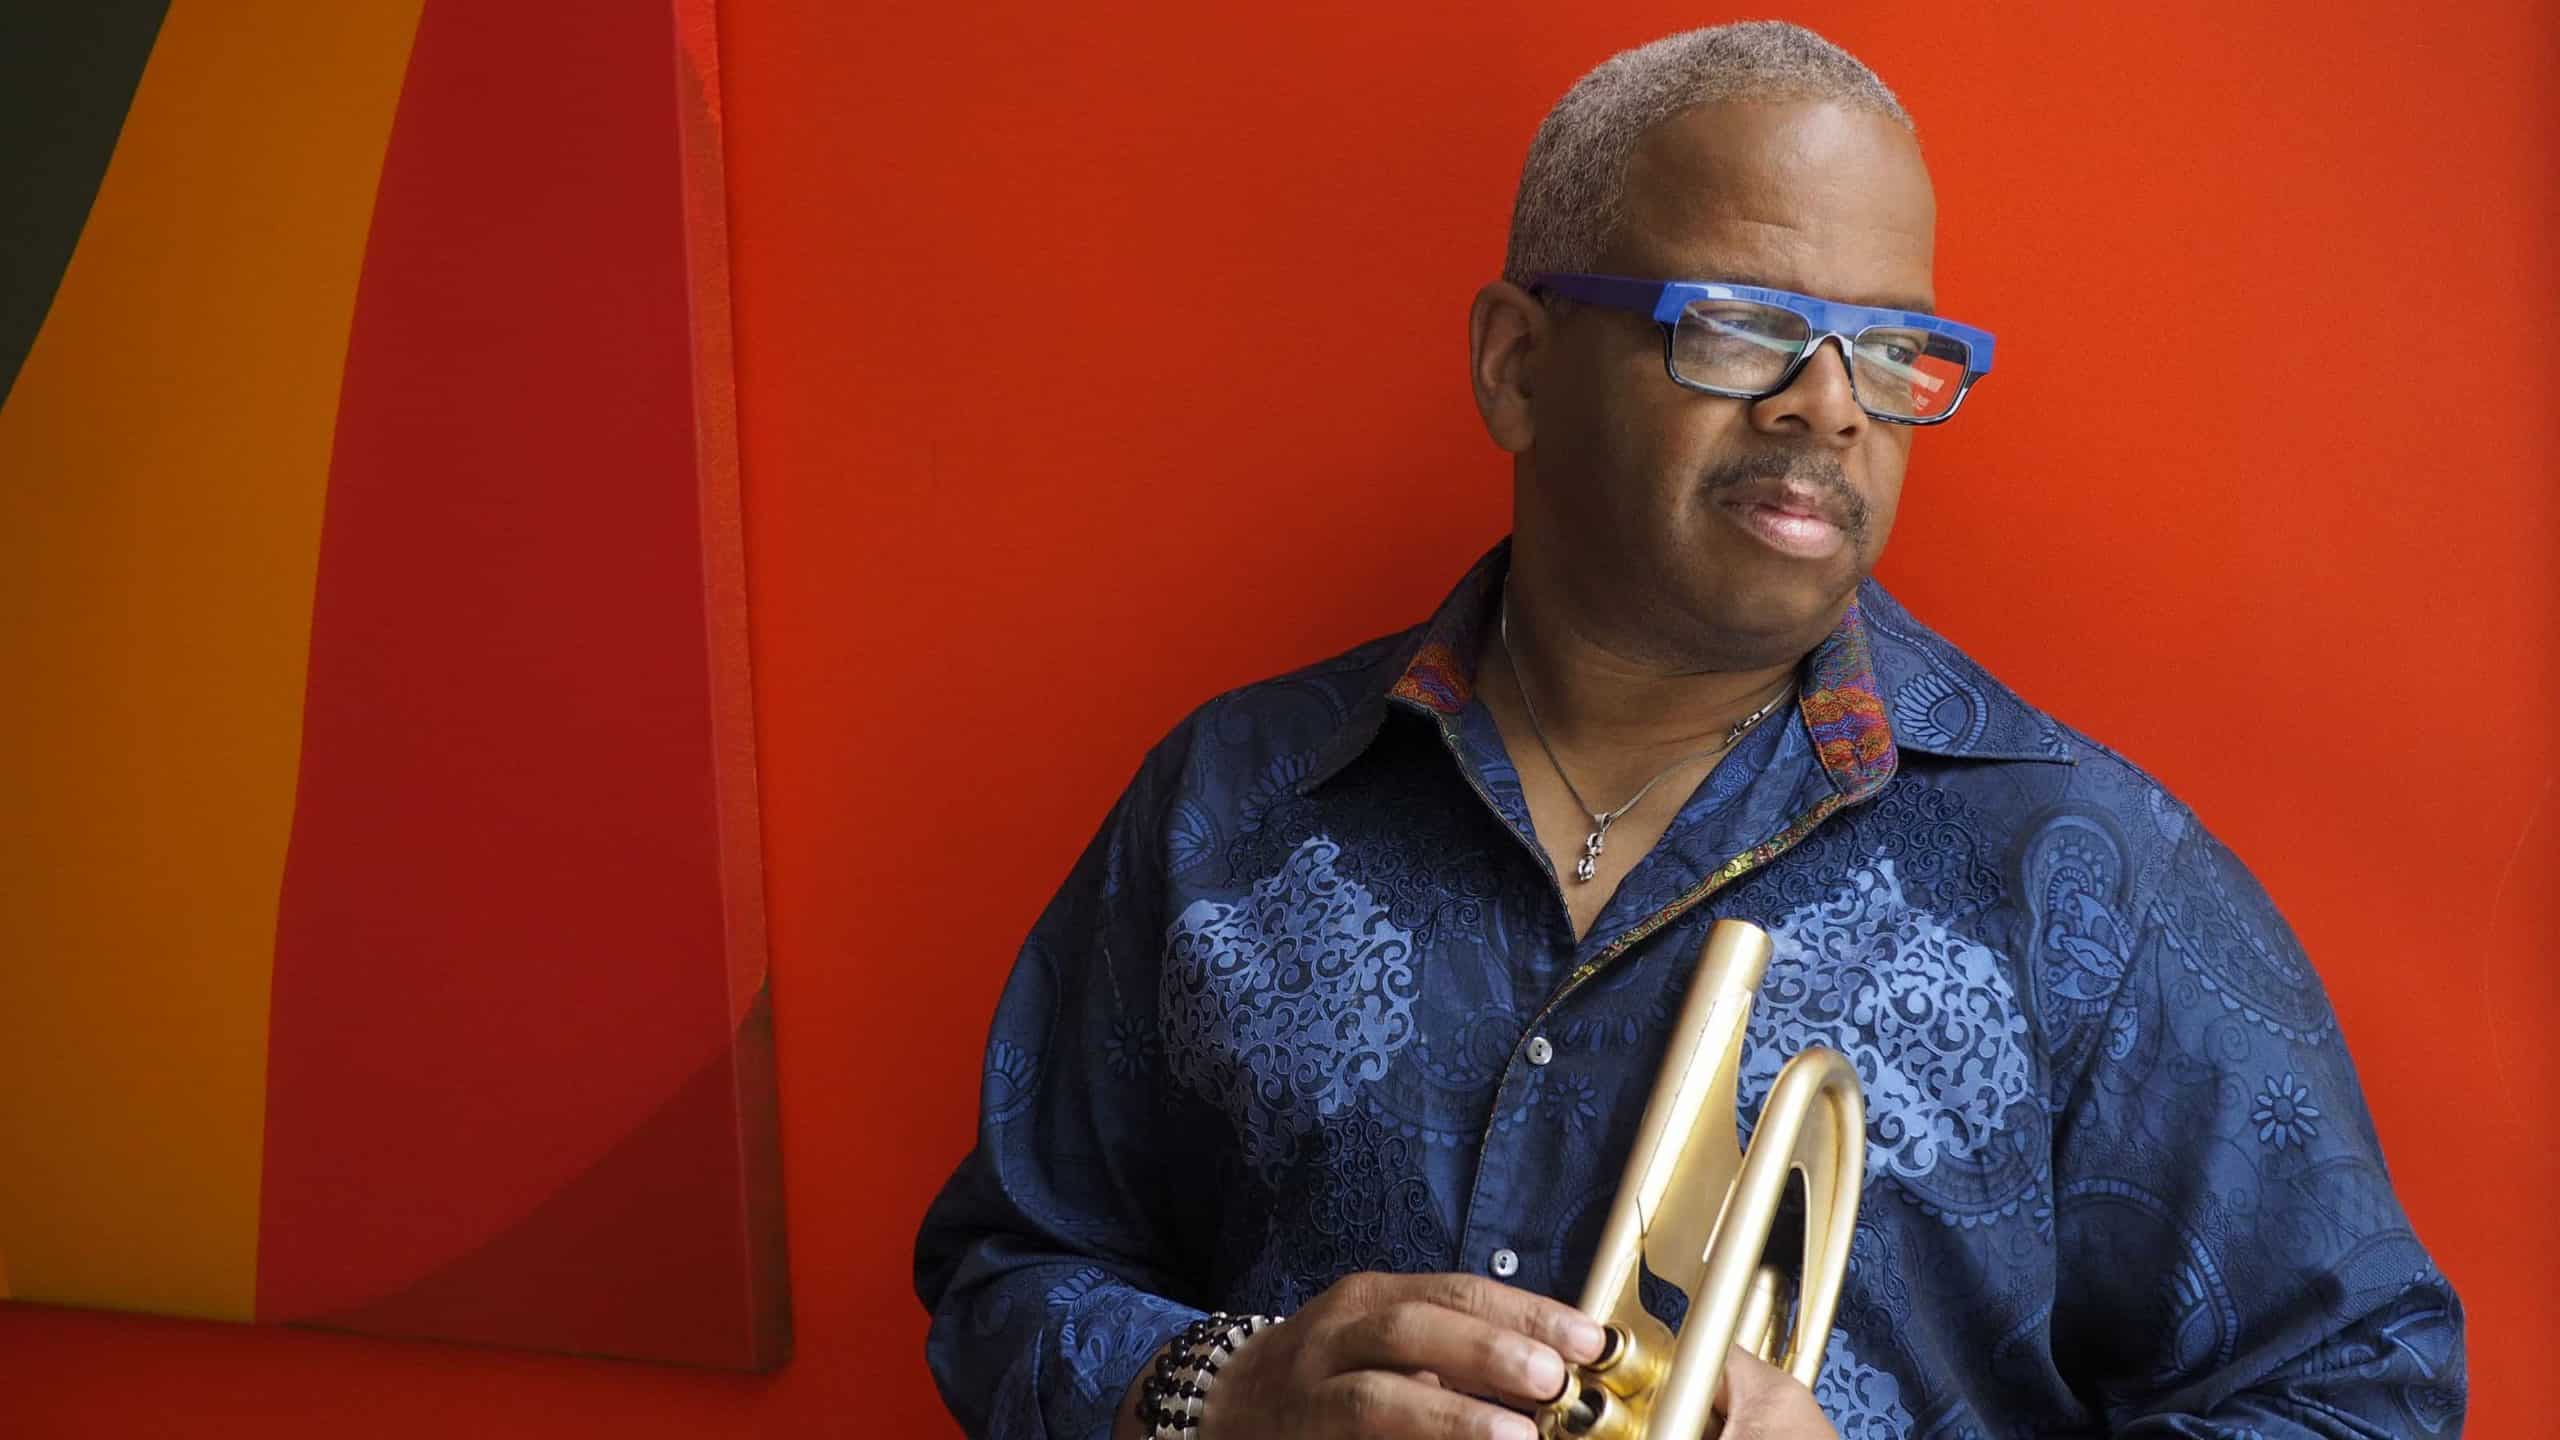 Grammy Award–winning jazz musician and composer Terence Blanchard presents Fire Shut Up in My Bones, his adaptation of Charles M. Blow’s moving memoir.